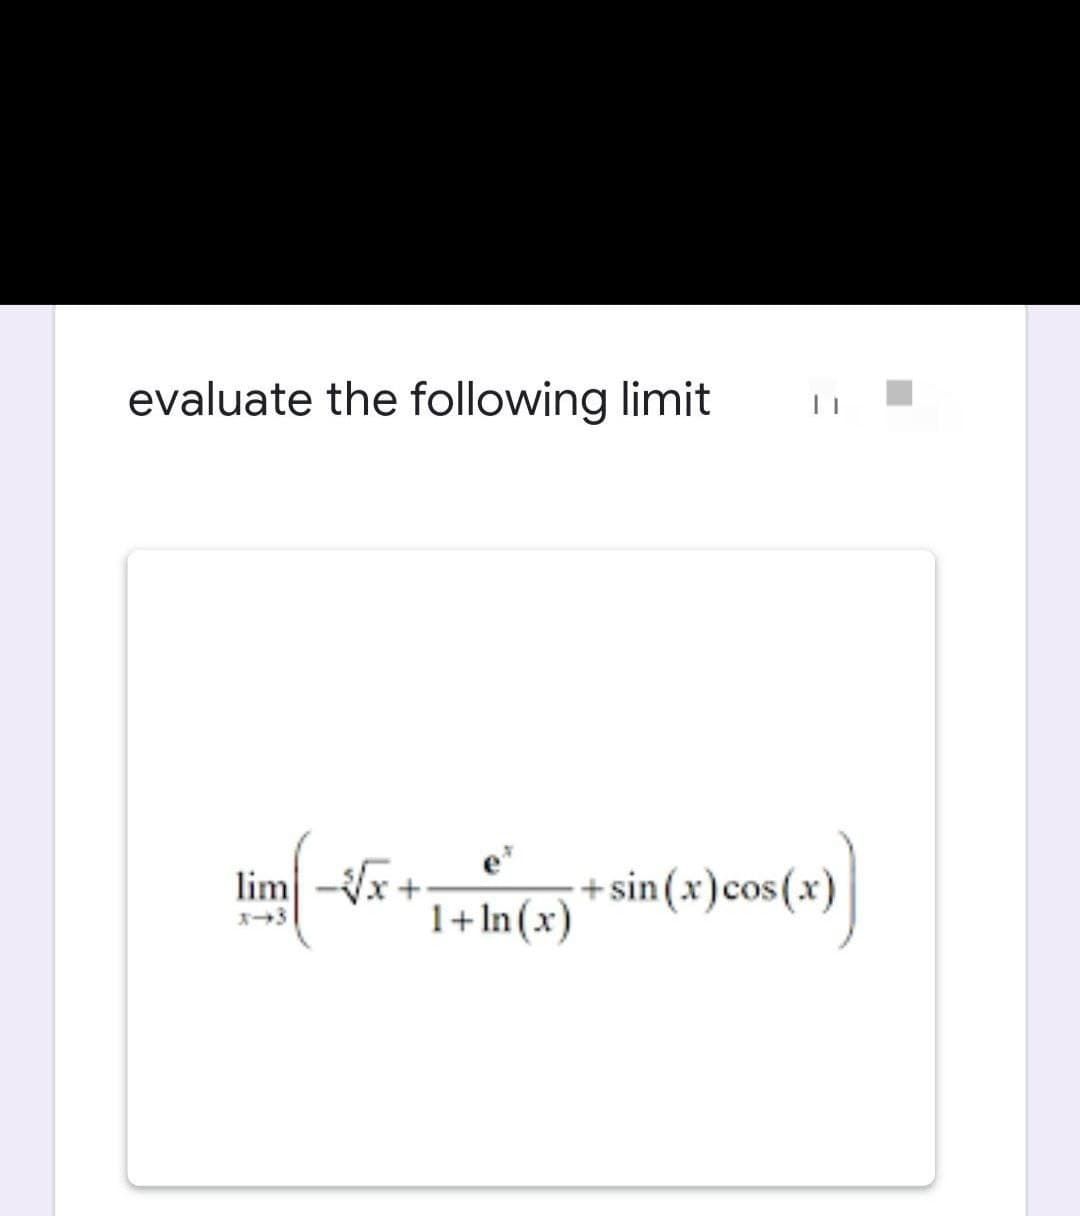 evaluate the following limit
lim -Vx +
+ sin(x)cos(x)
1+ In (x)
sin(=)cos(
